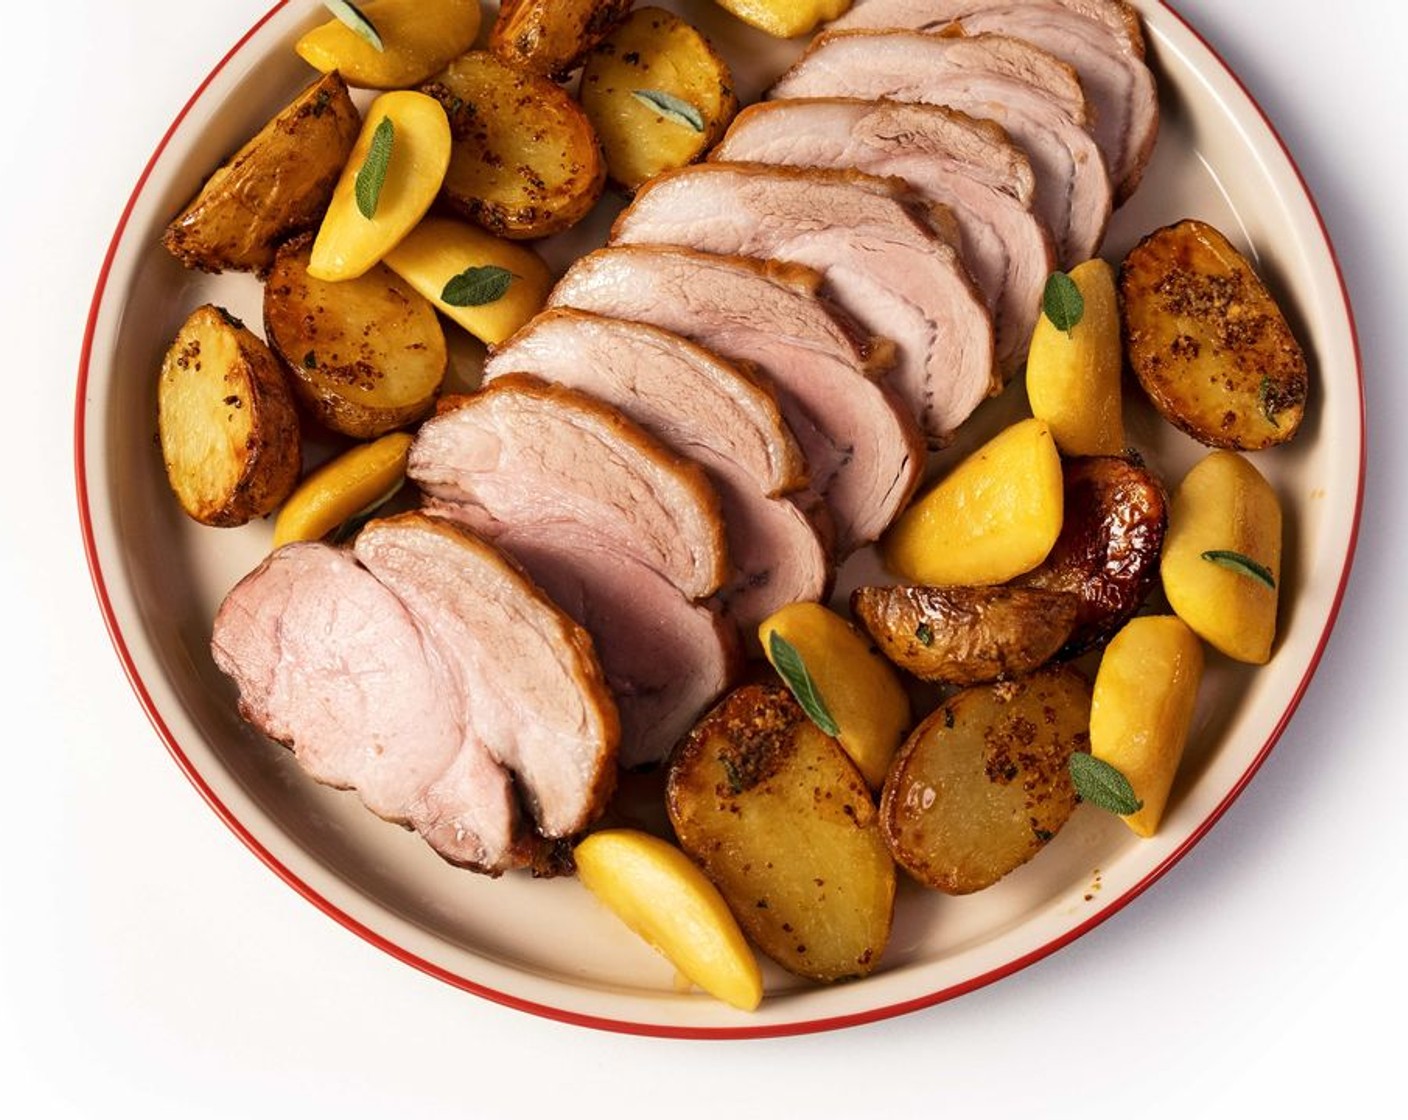 Crispy Pork Loin with Apples and Roasted Potatoes